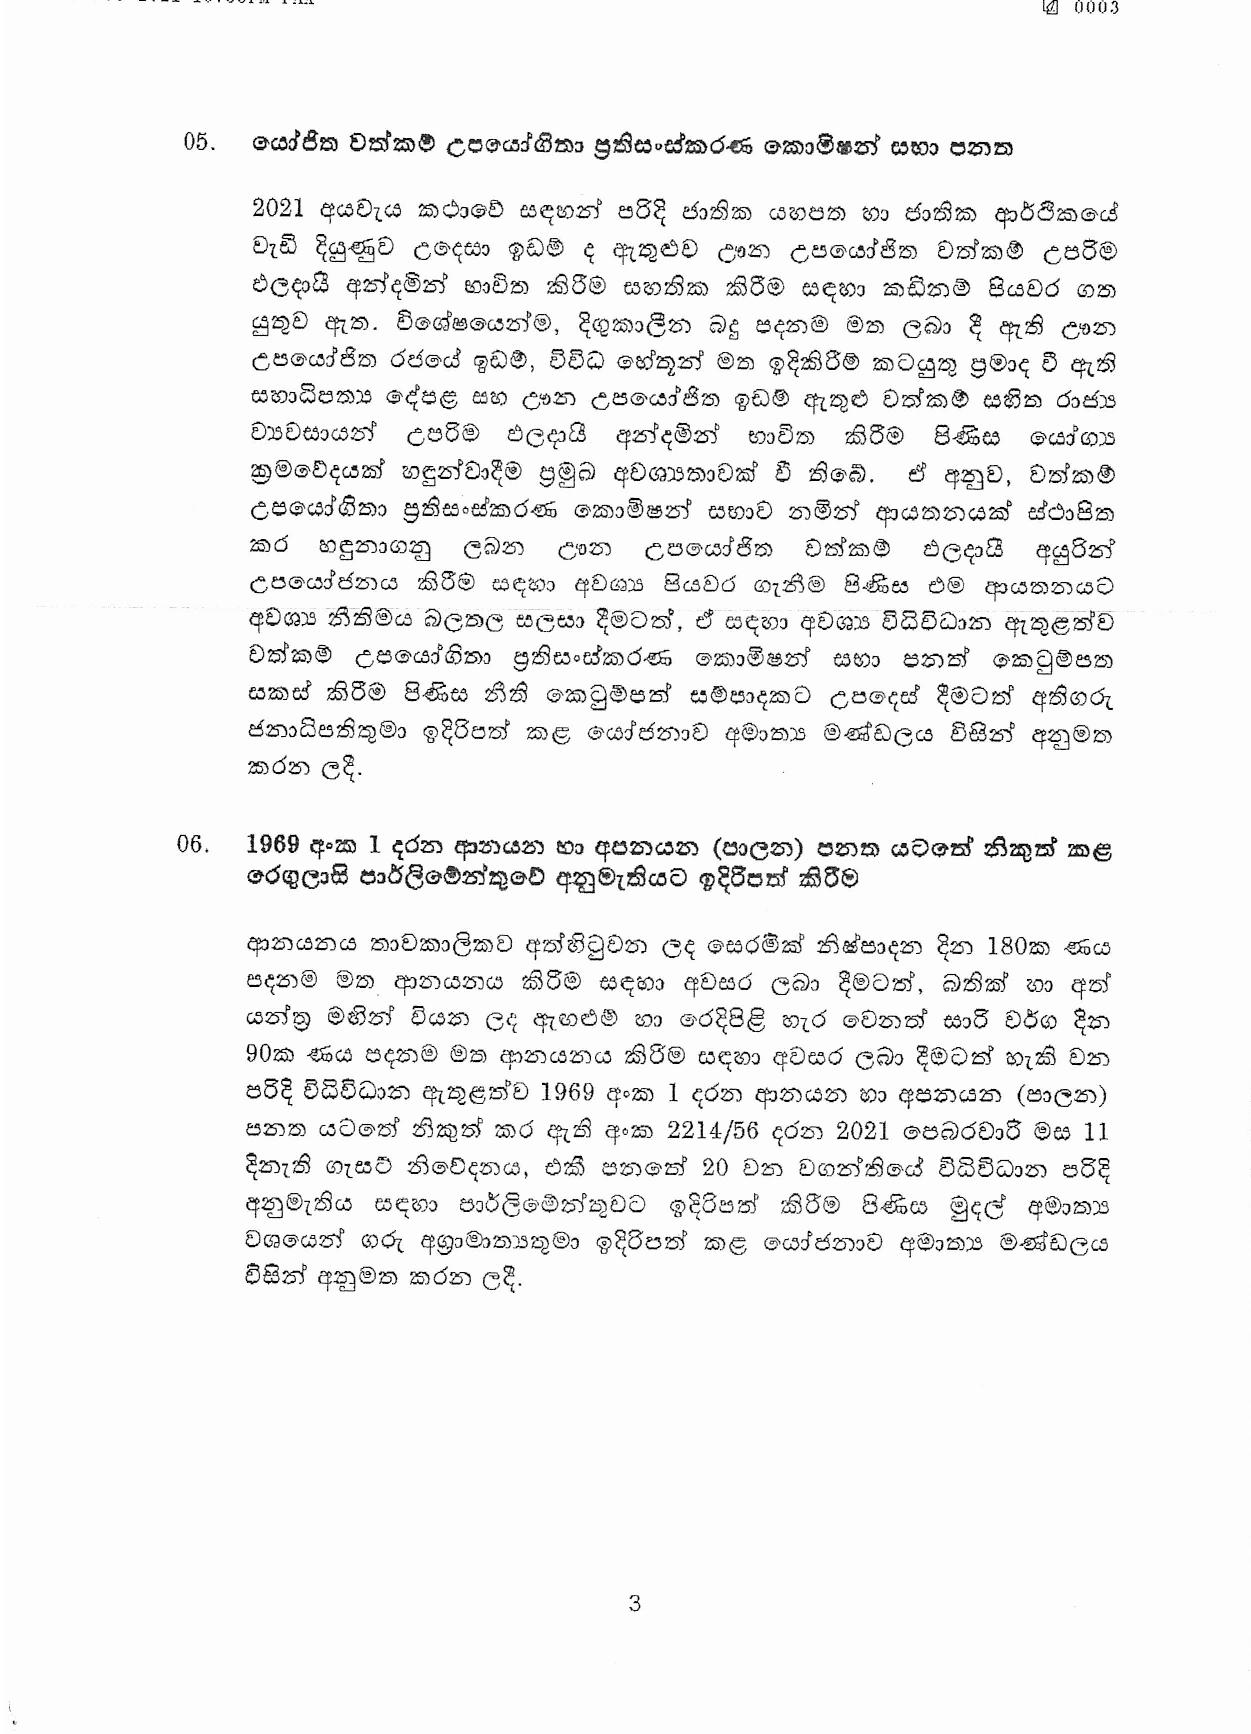 Cabinet Decision on 23.03.2021 page 003